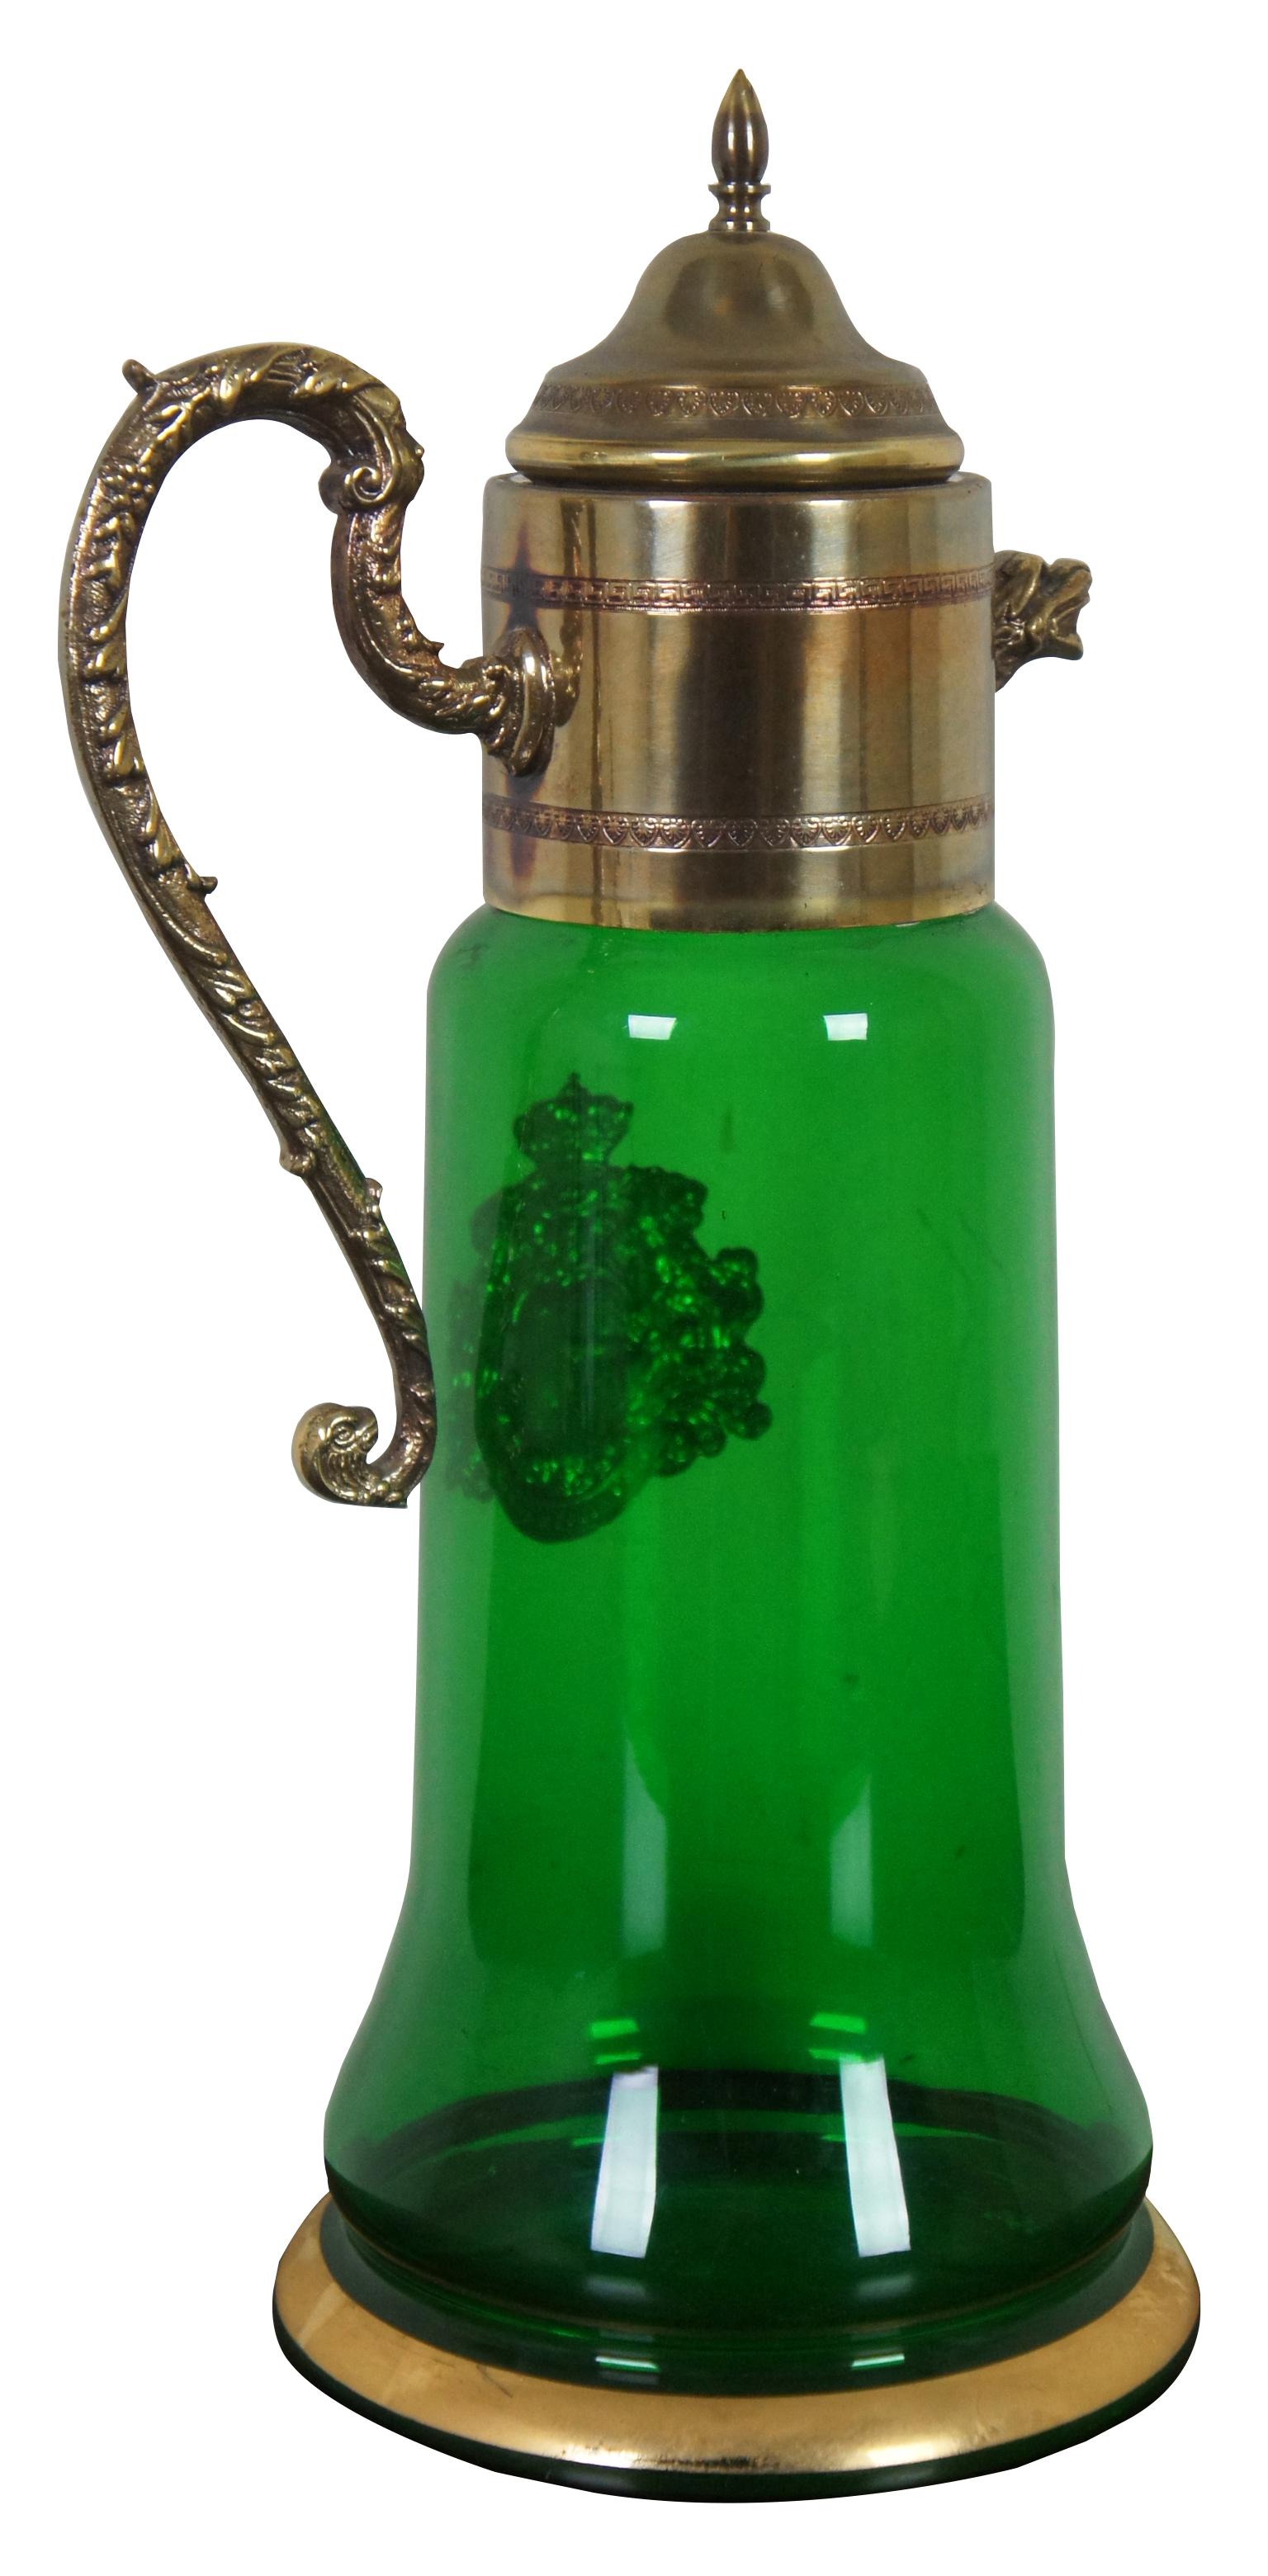 Vintage bohemian green glass pitcher with glass top and handle, griffin shaped spout, and a coat of arms with the motto Spes Ultima Dea (Latin for “Hope is the last goddess.”).
  